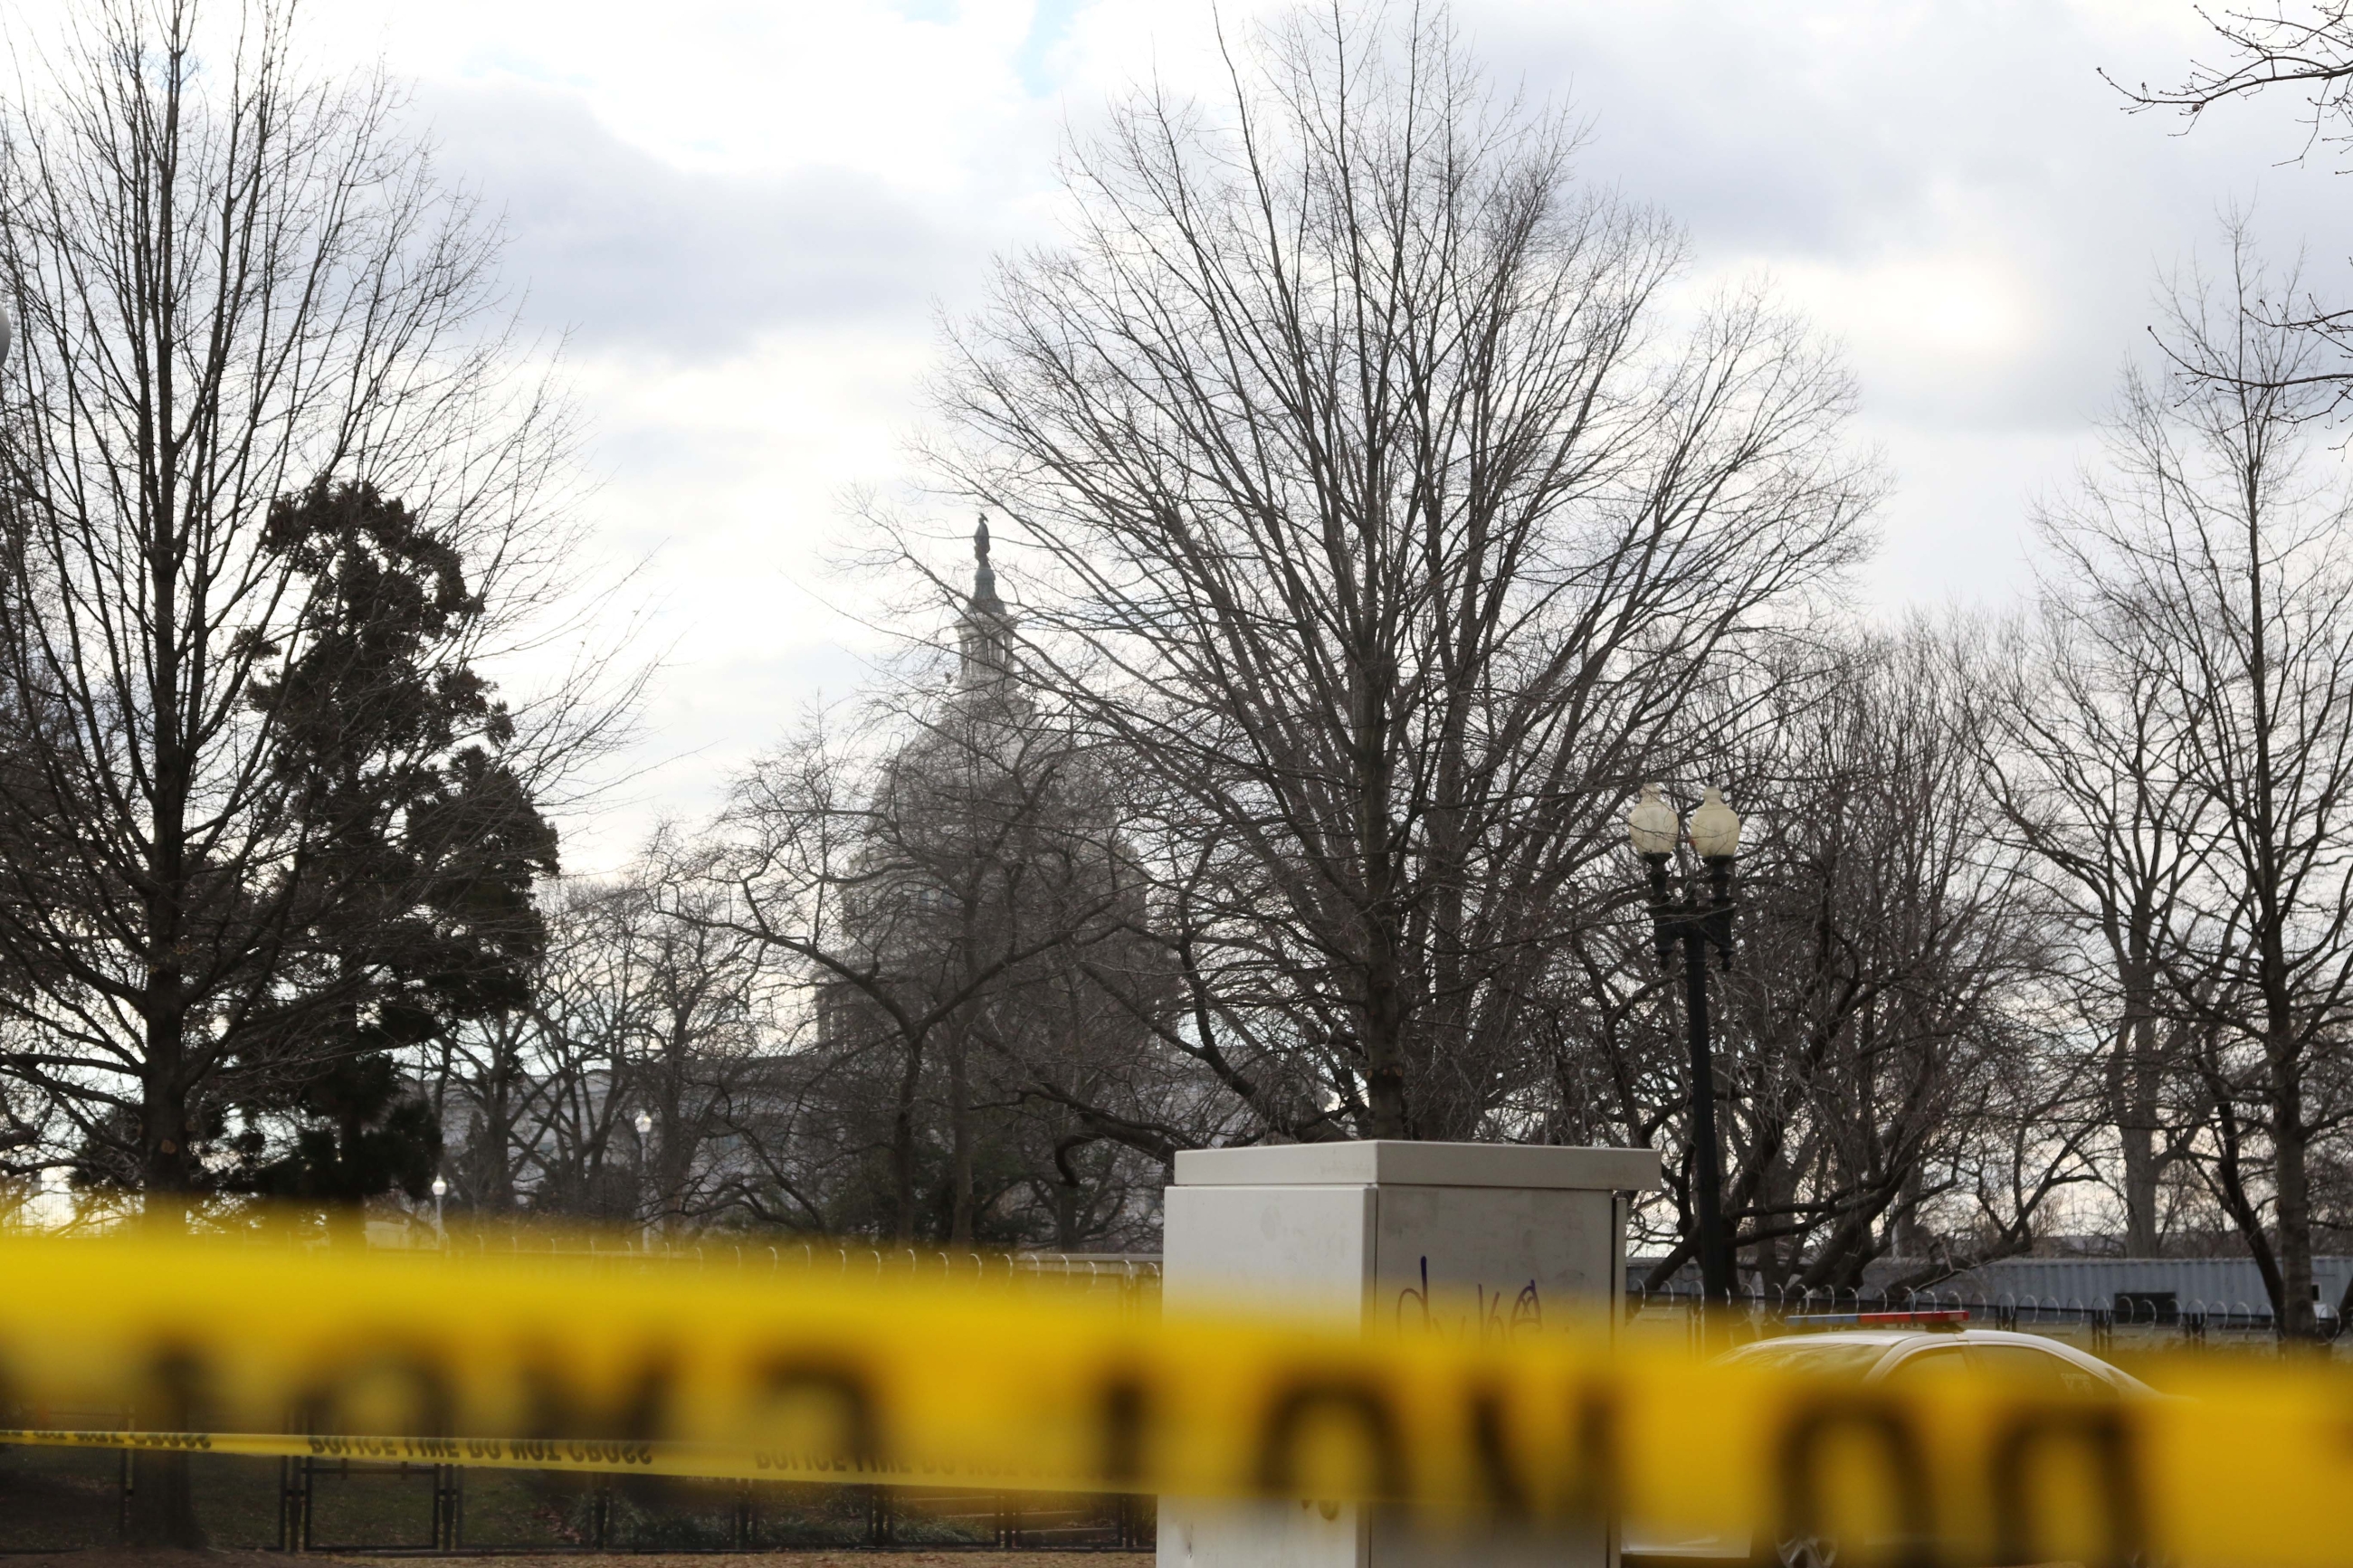 The top of the US Capitol building seen from behind fencing and caution tape.